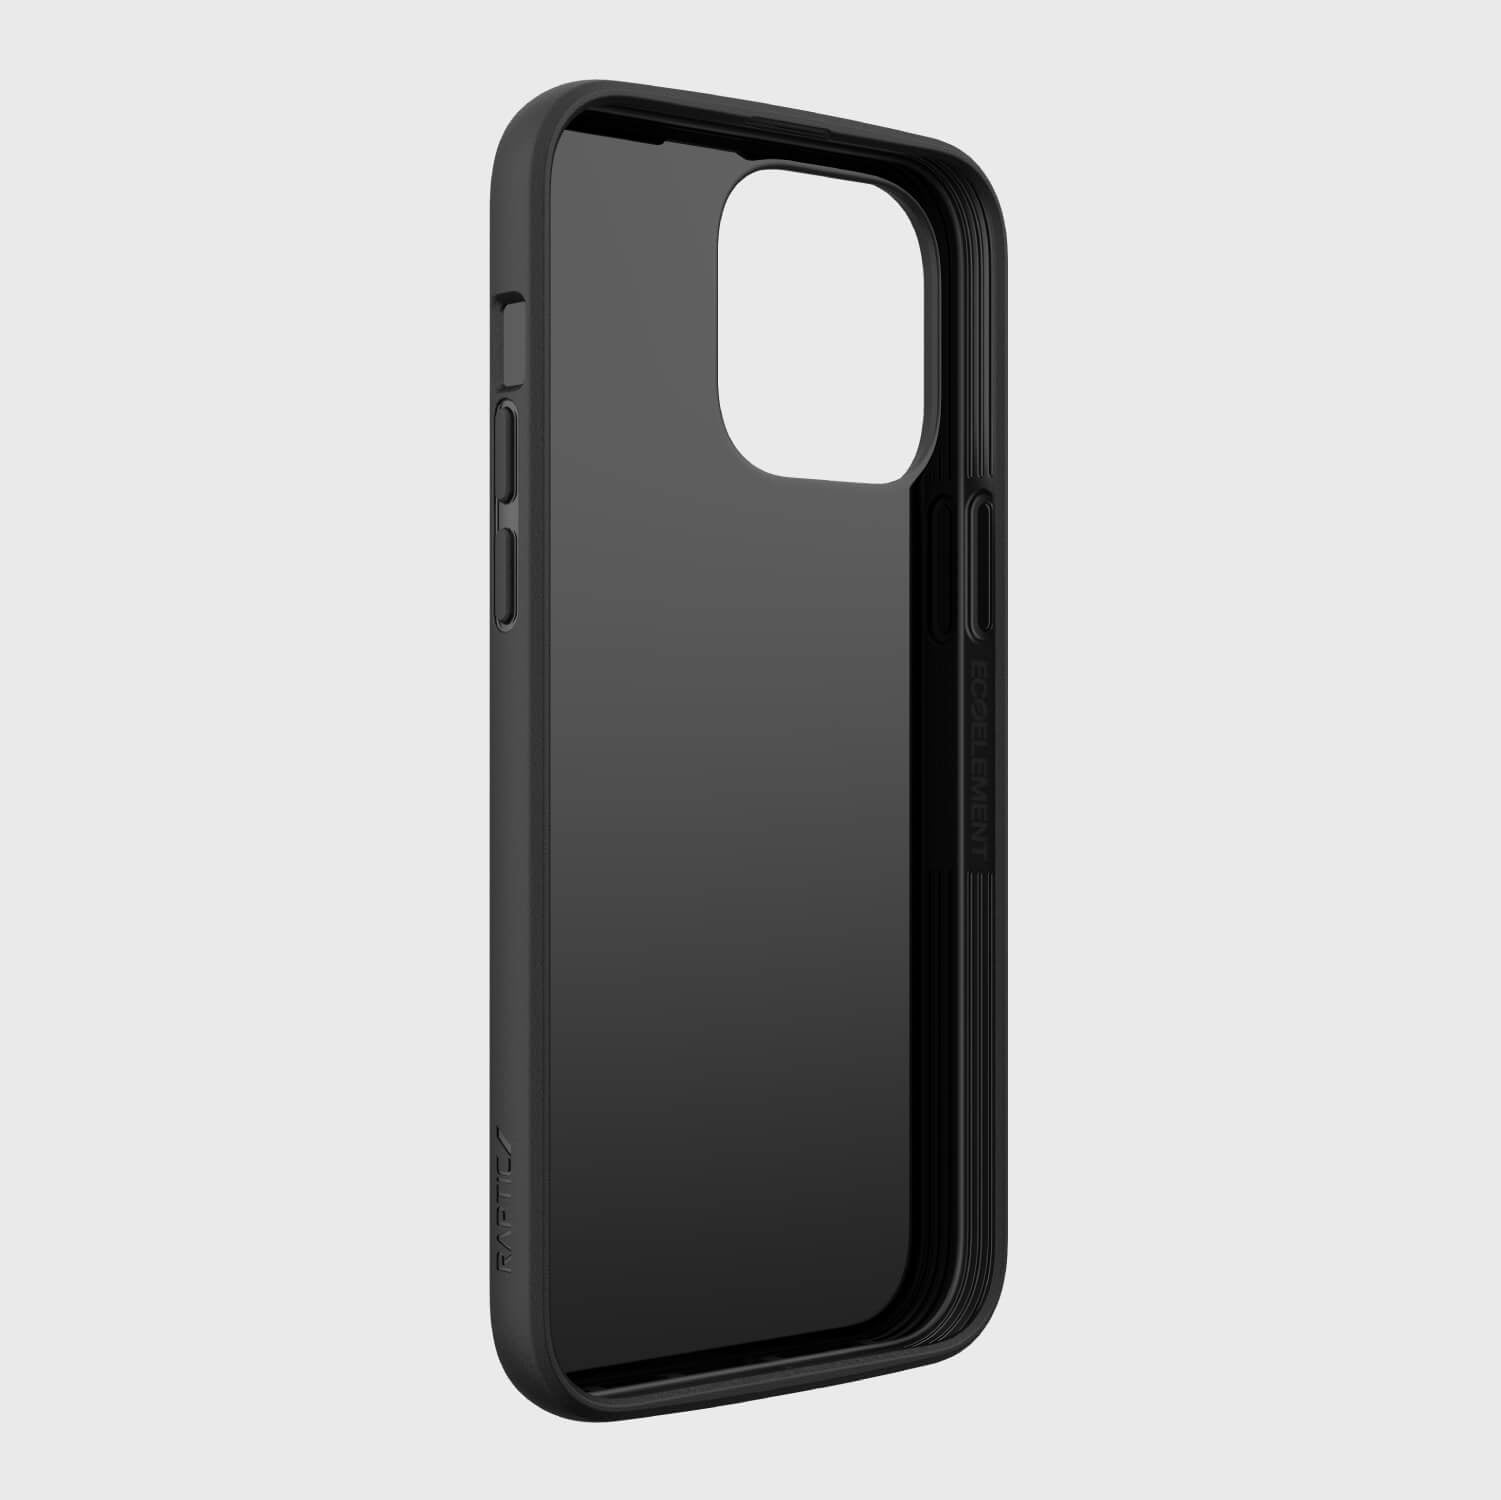 A Raptic Slim & Sleek case for the black iPhone 11 Pro, showcasing its environmentally friendly design, placed on a white background.